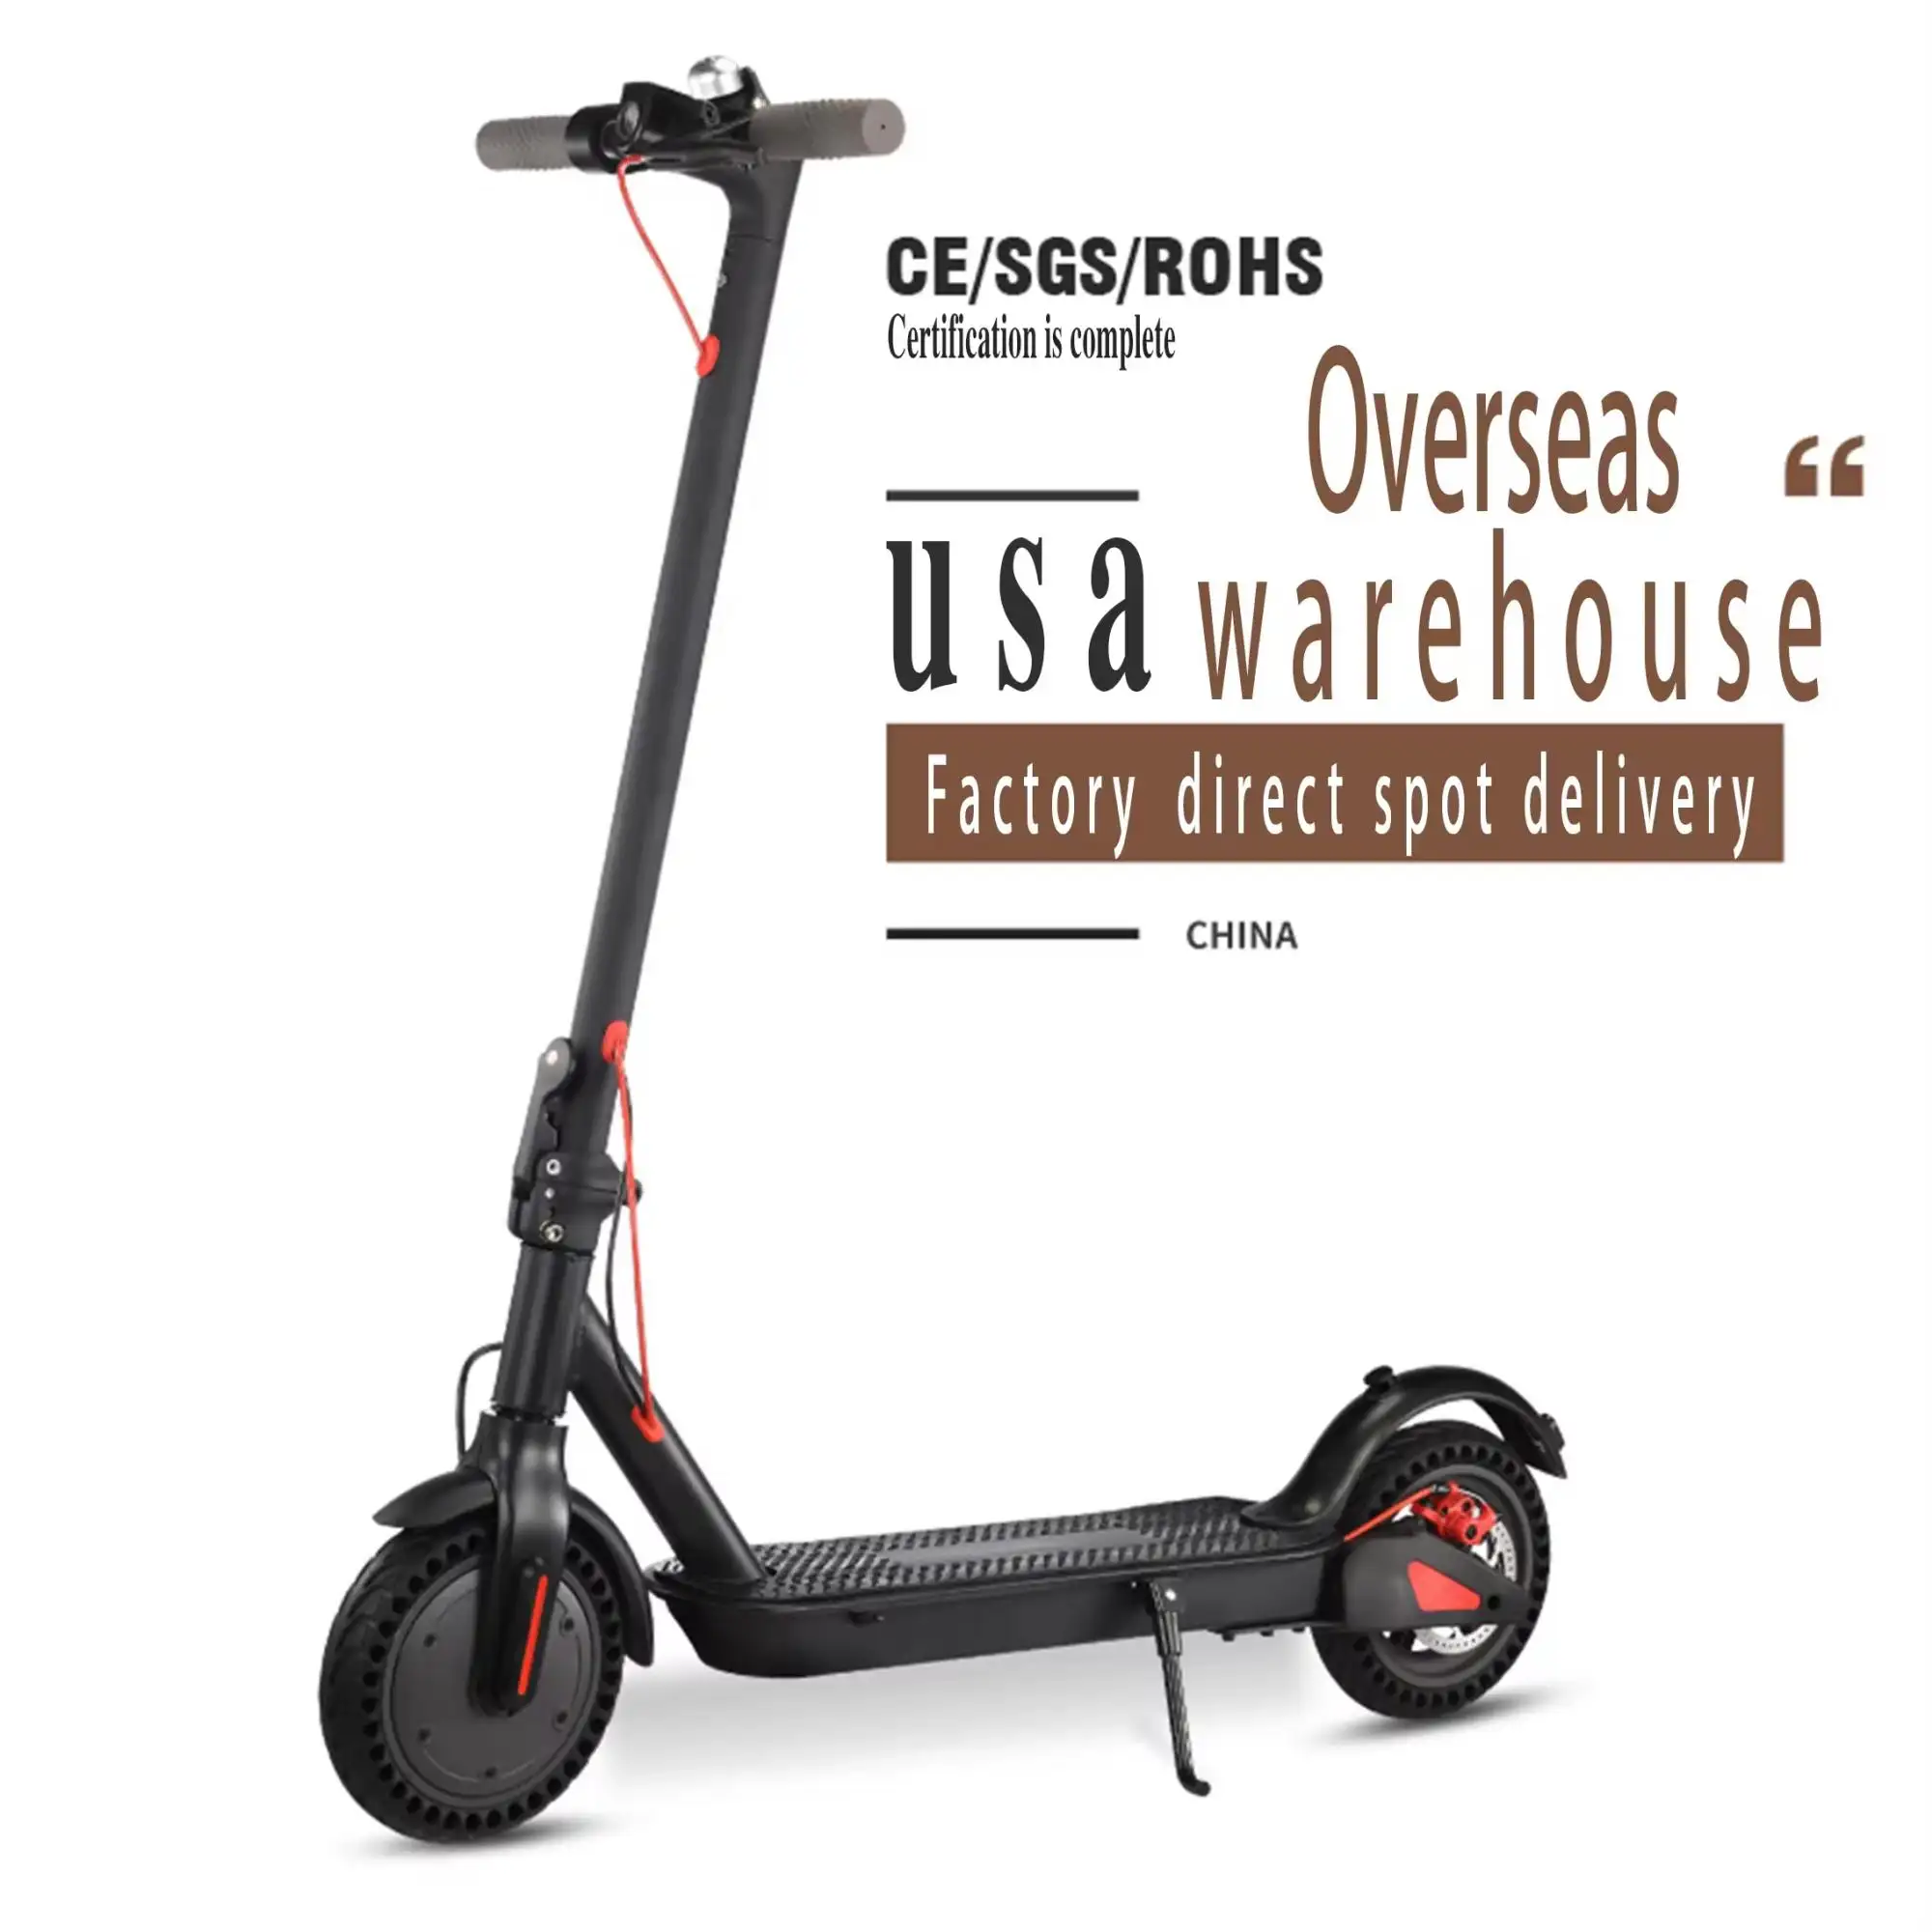 American Warehouses Folding Portable Mobility 36V 250W10.4AH Disc Brake Steel Frame Electric Scooters For Unisex